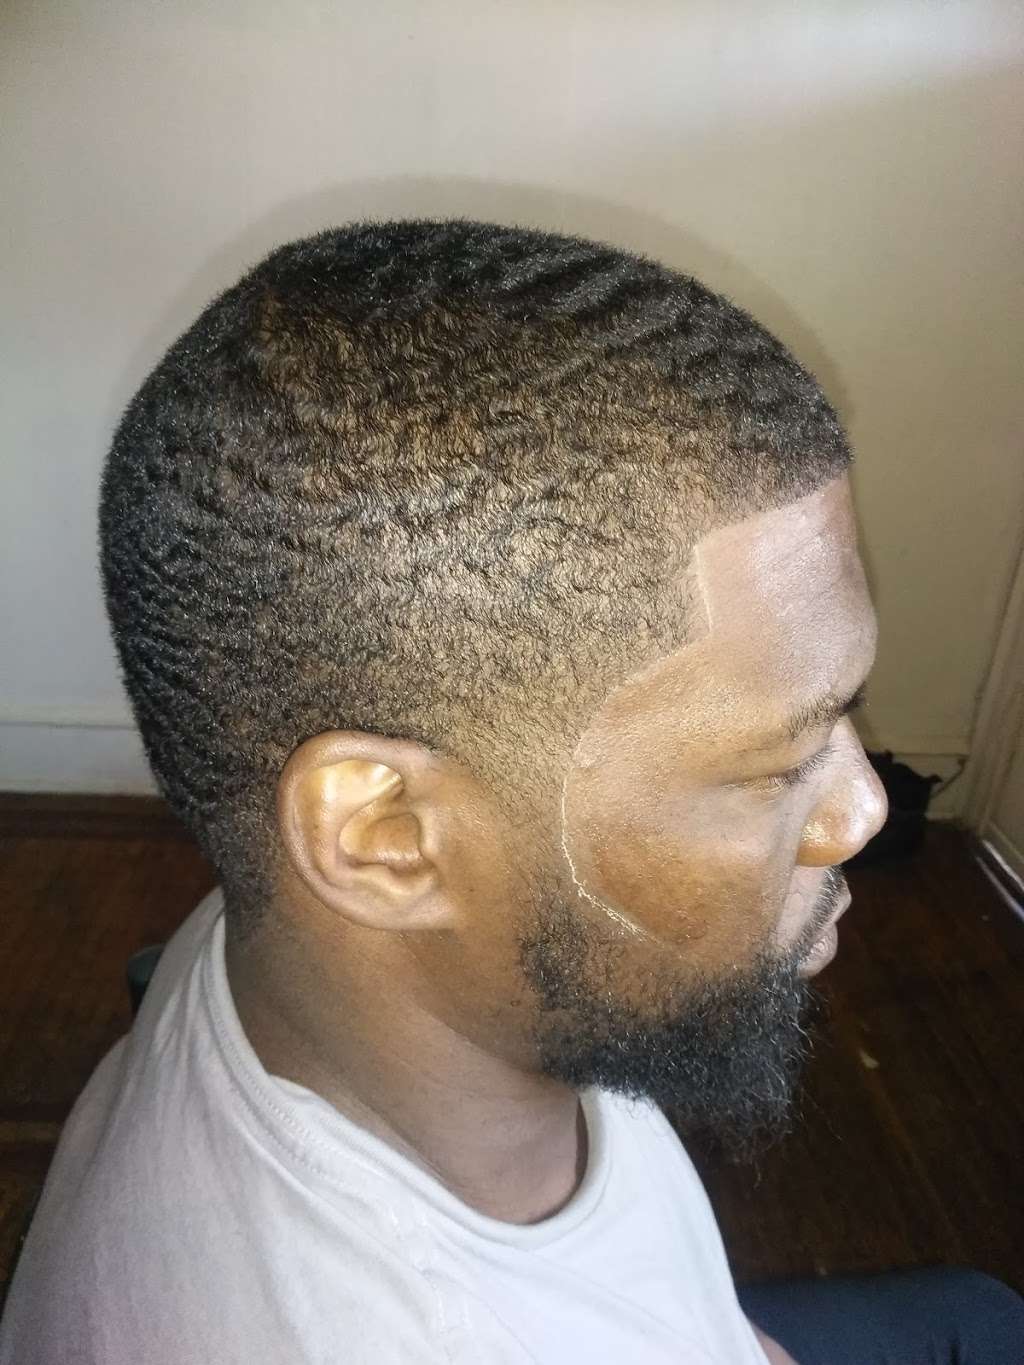 Traveling Barber Shop, Inc. | 6 West Main Street - First Floor, Norristown, PA 19401, USA | Phone: (610) 277-7800